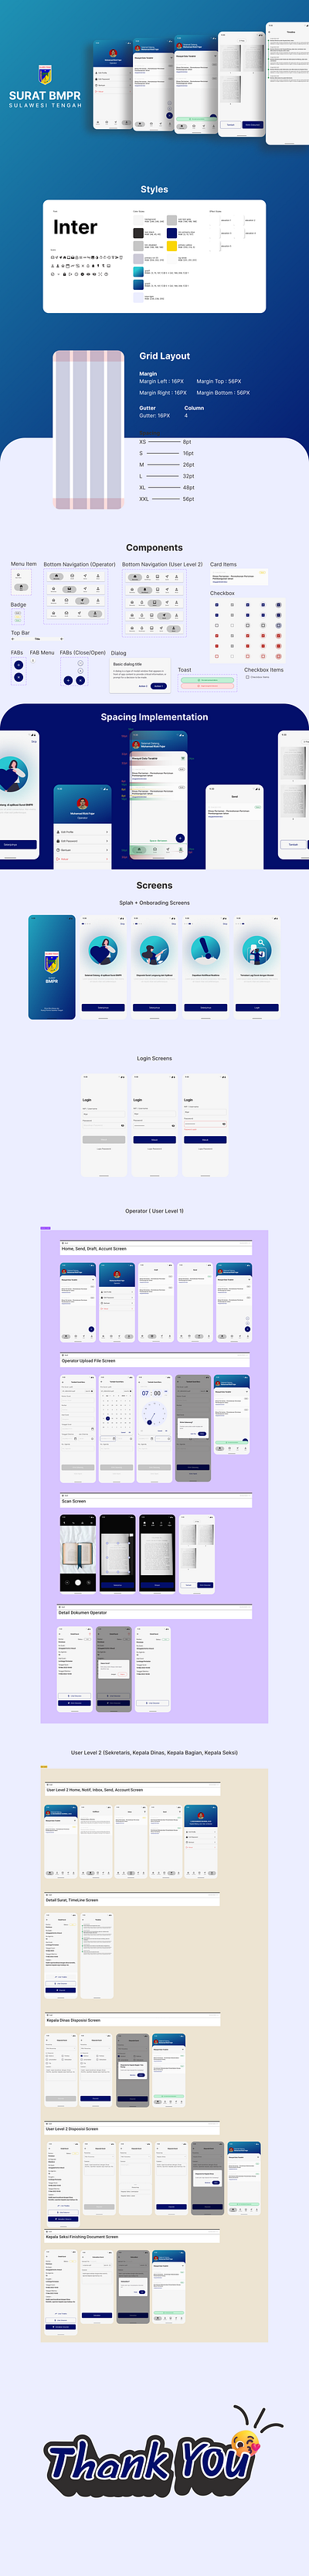 digitizing government manual approval documents App app dailyui design graphic design interaction design mobile app design mobile ui product design ui uiux user experience user interface